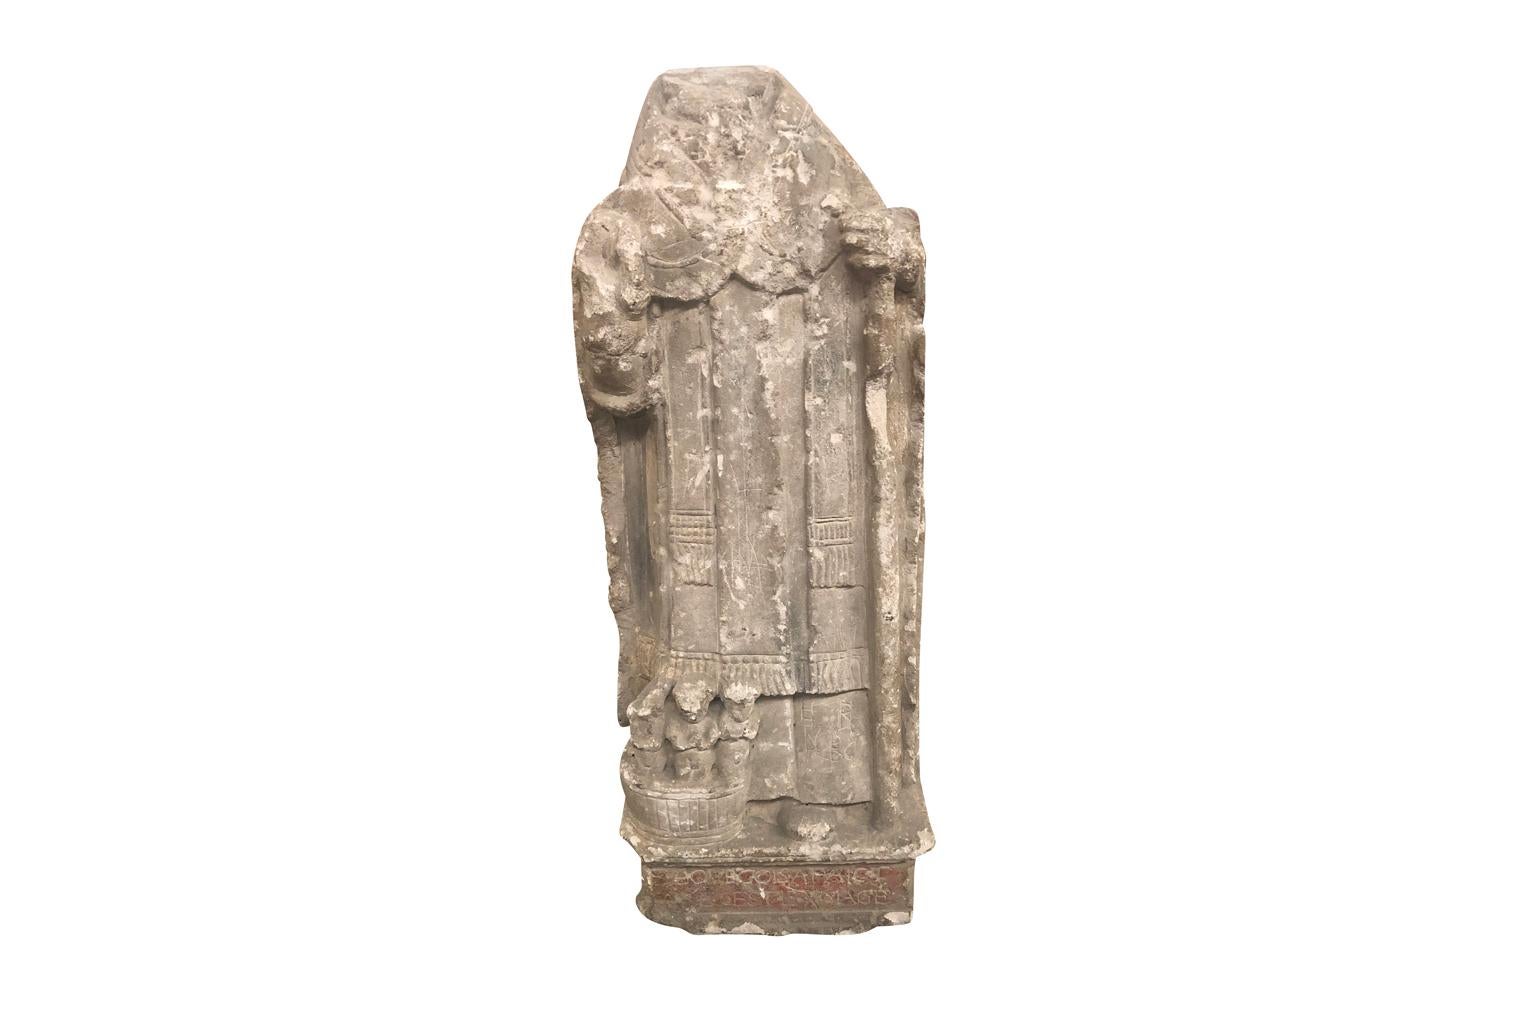 A wonderful Gothic period hand carved stone statue of Saint Nicholas from the Avignon area of France. The now headless Saint Nicholas holds his staff and there are three children in a tub at his feet.